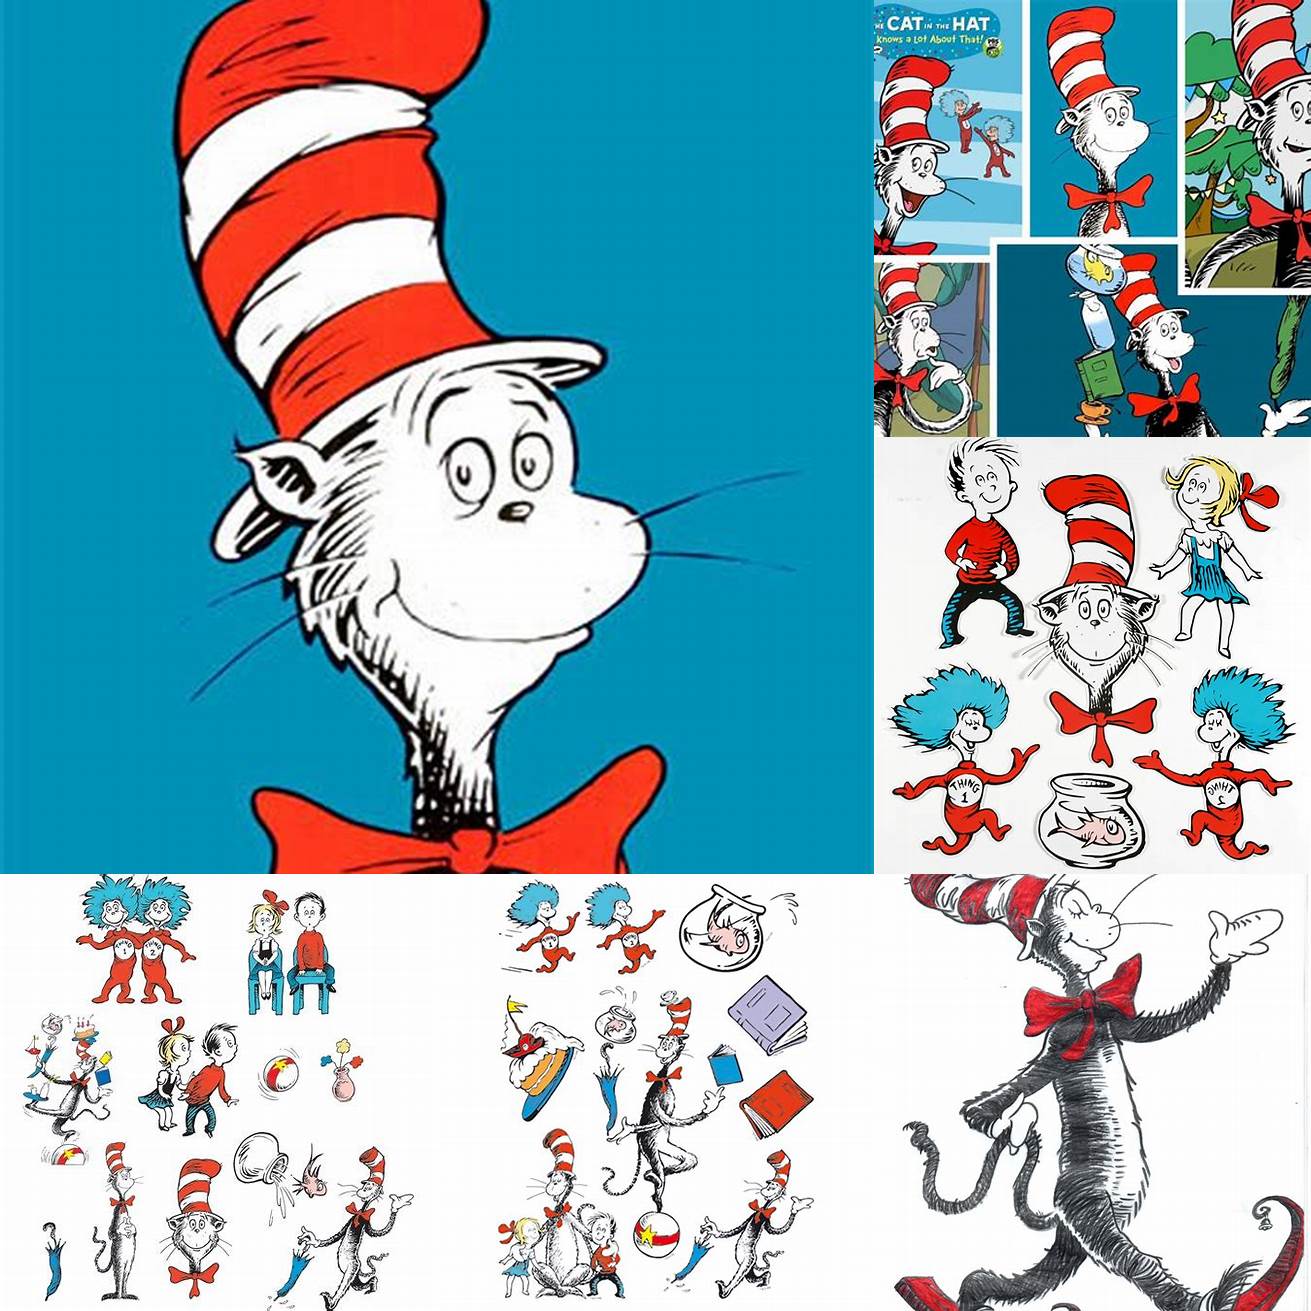 The Cat in the Hat Character Design